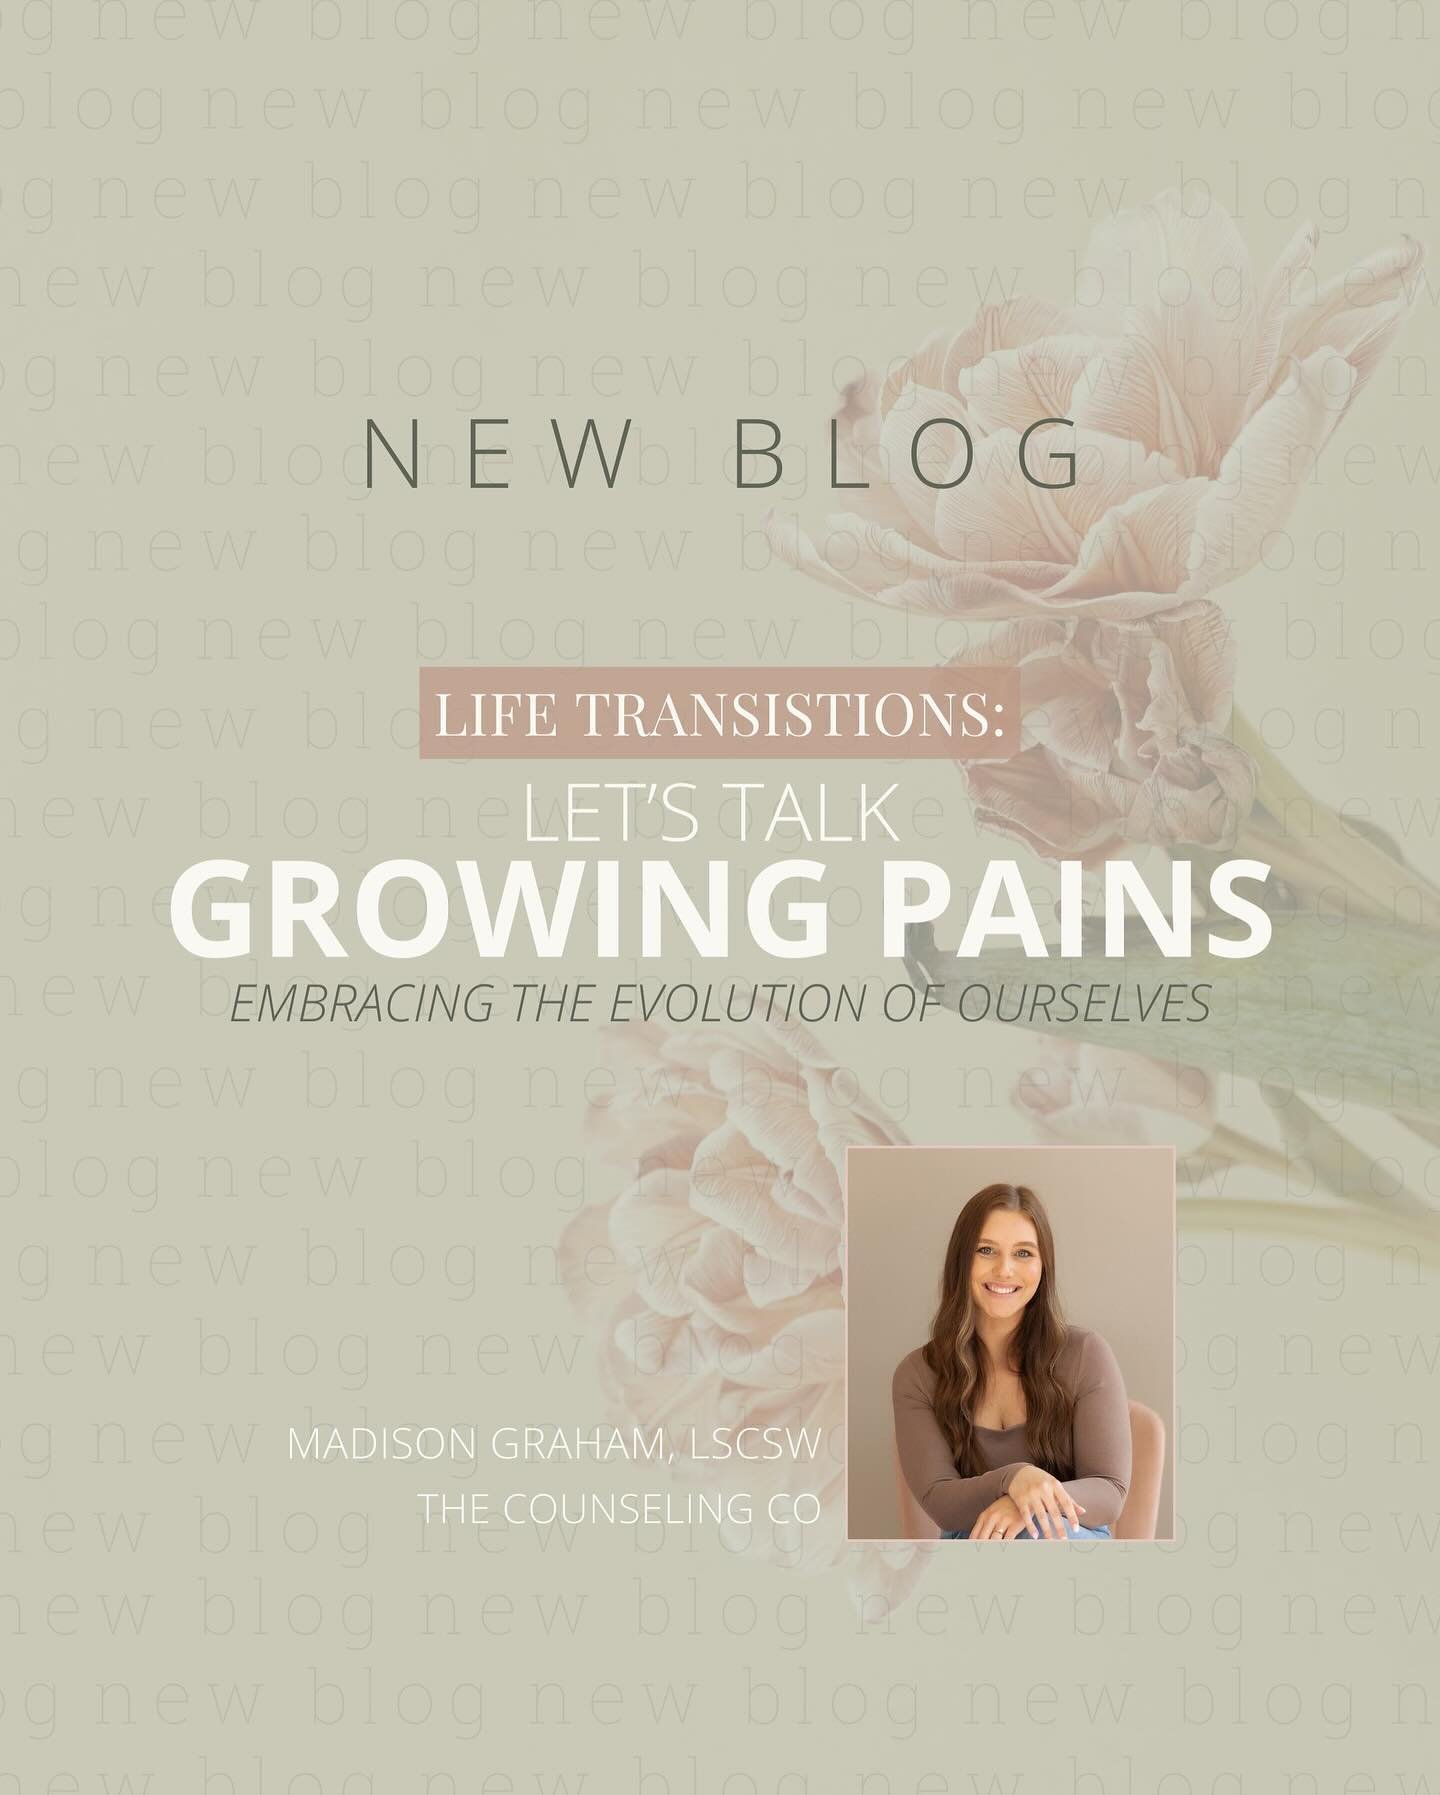 ✨NEW BLOG✨ Learn how to embrace growth through discomfort and change. Check out our new blog by Madison Graham, LSCSW. 🤍 Link in bio.